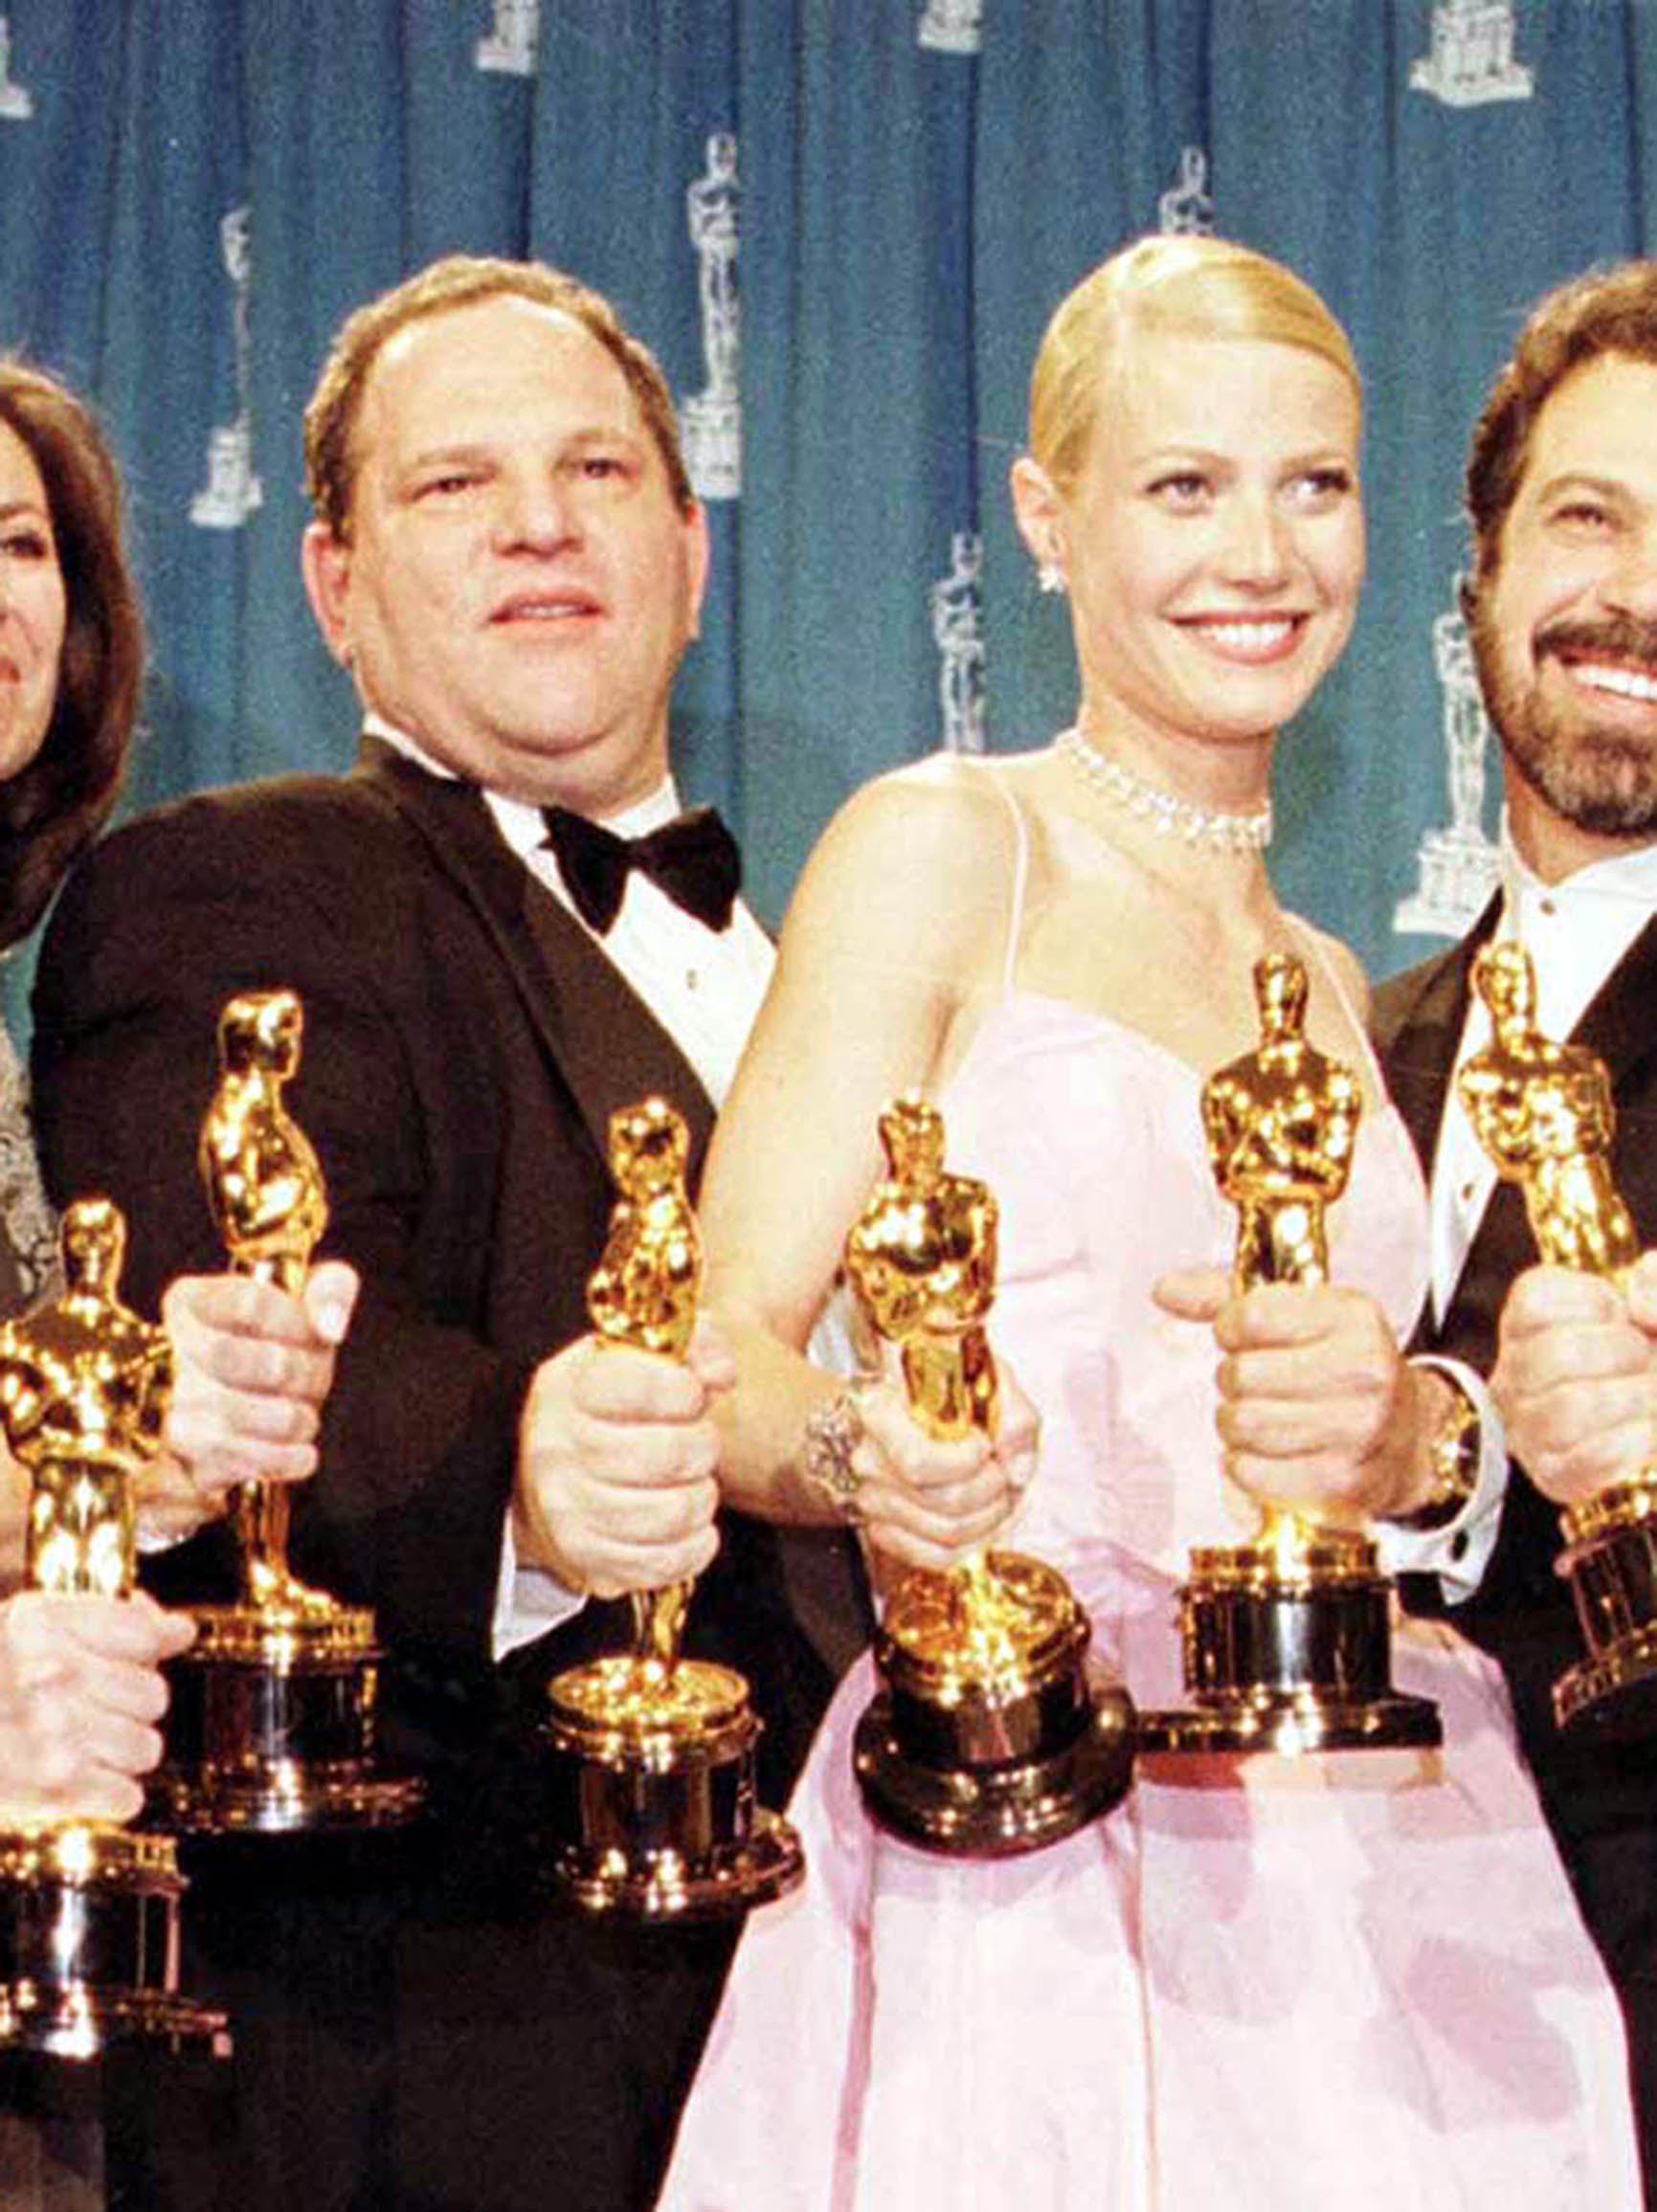 Harvey Weinstein and Gwyneth Paltrow with Oscars won for Shakespeare In Love in 1999 (PA)